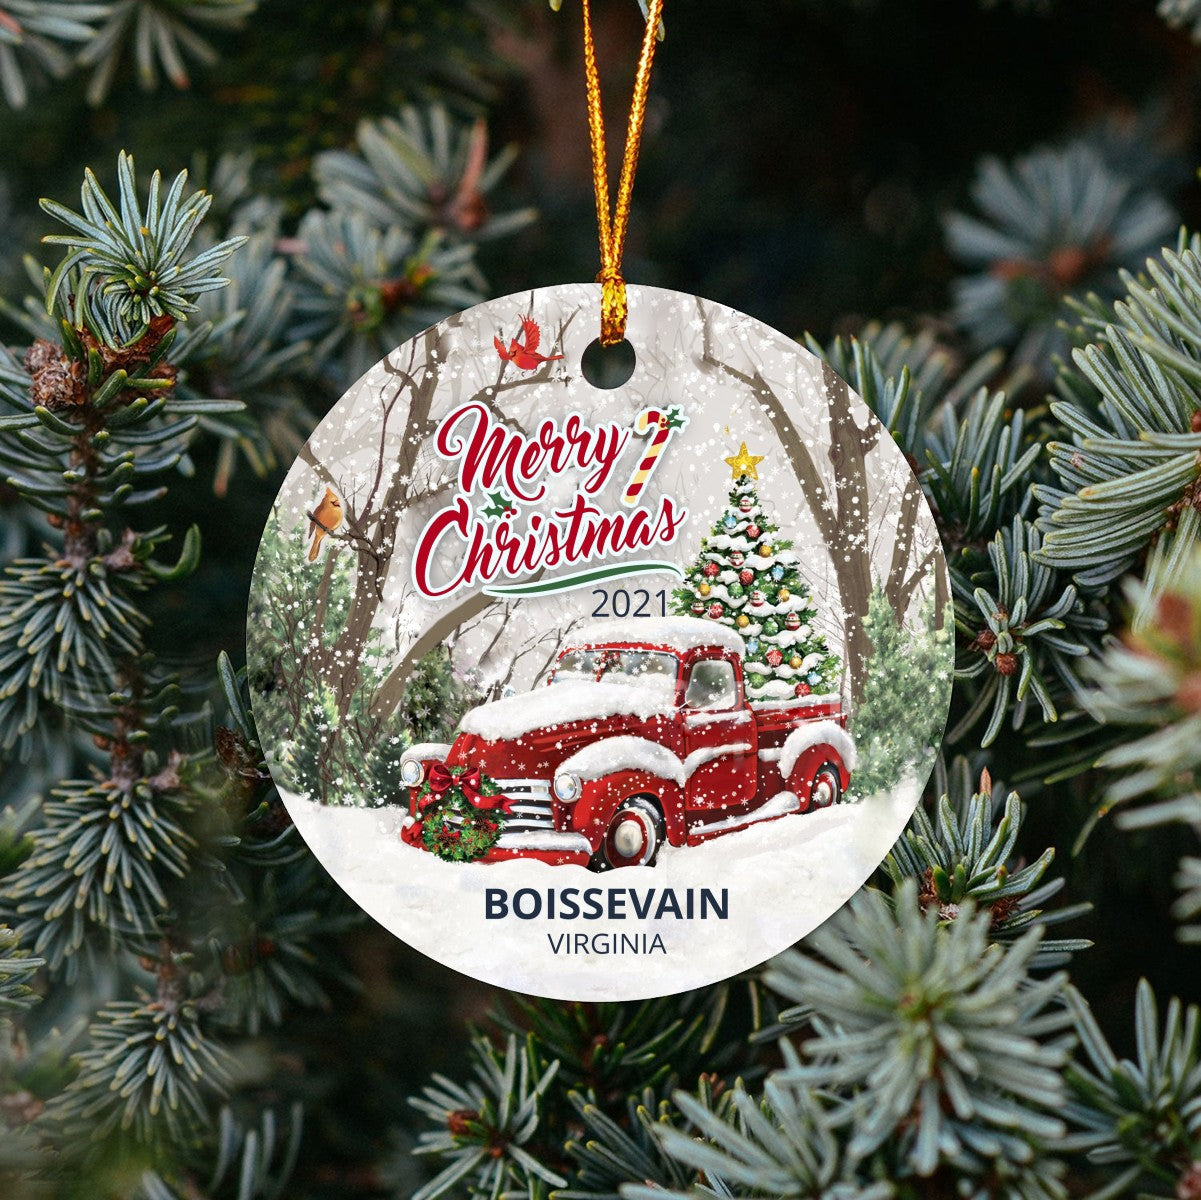 Christmas Tree Ornaments Boissevain - Ornament With Name City, State Boissevain Virginia VA Ornament - Red Truck Xmas Ornaments 3'' Plastic Gift For Family, Friend And Housewarming